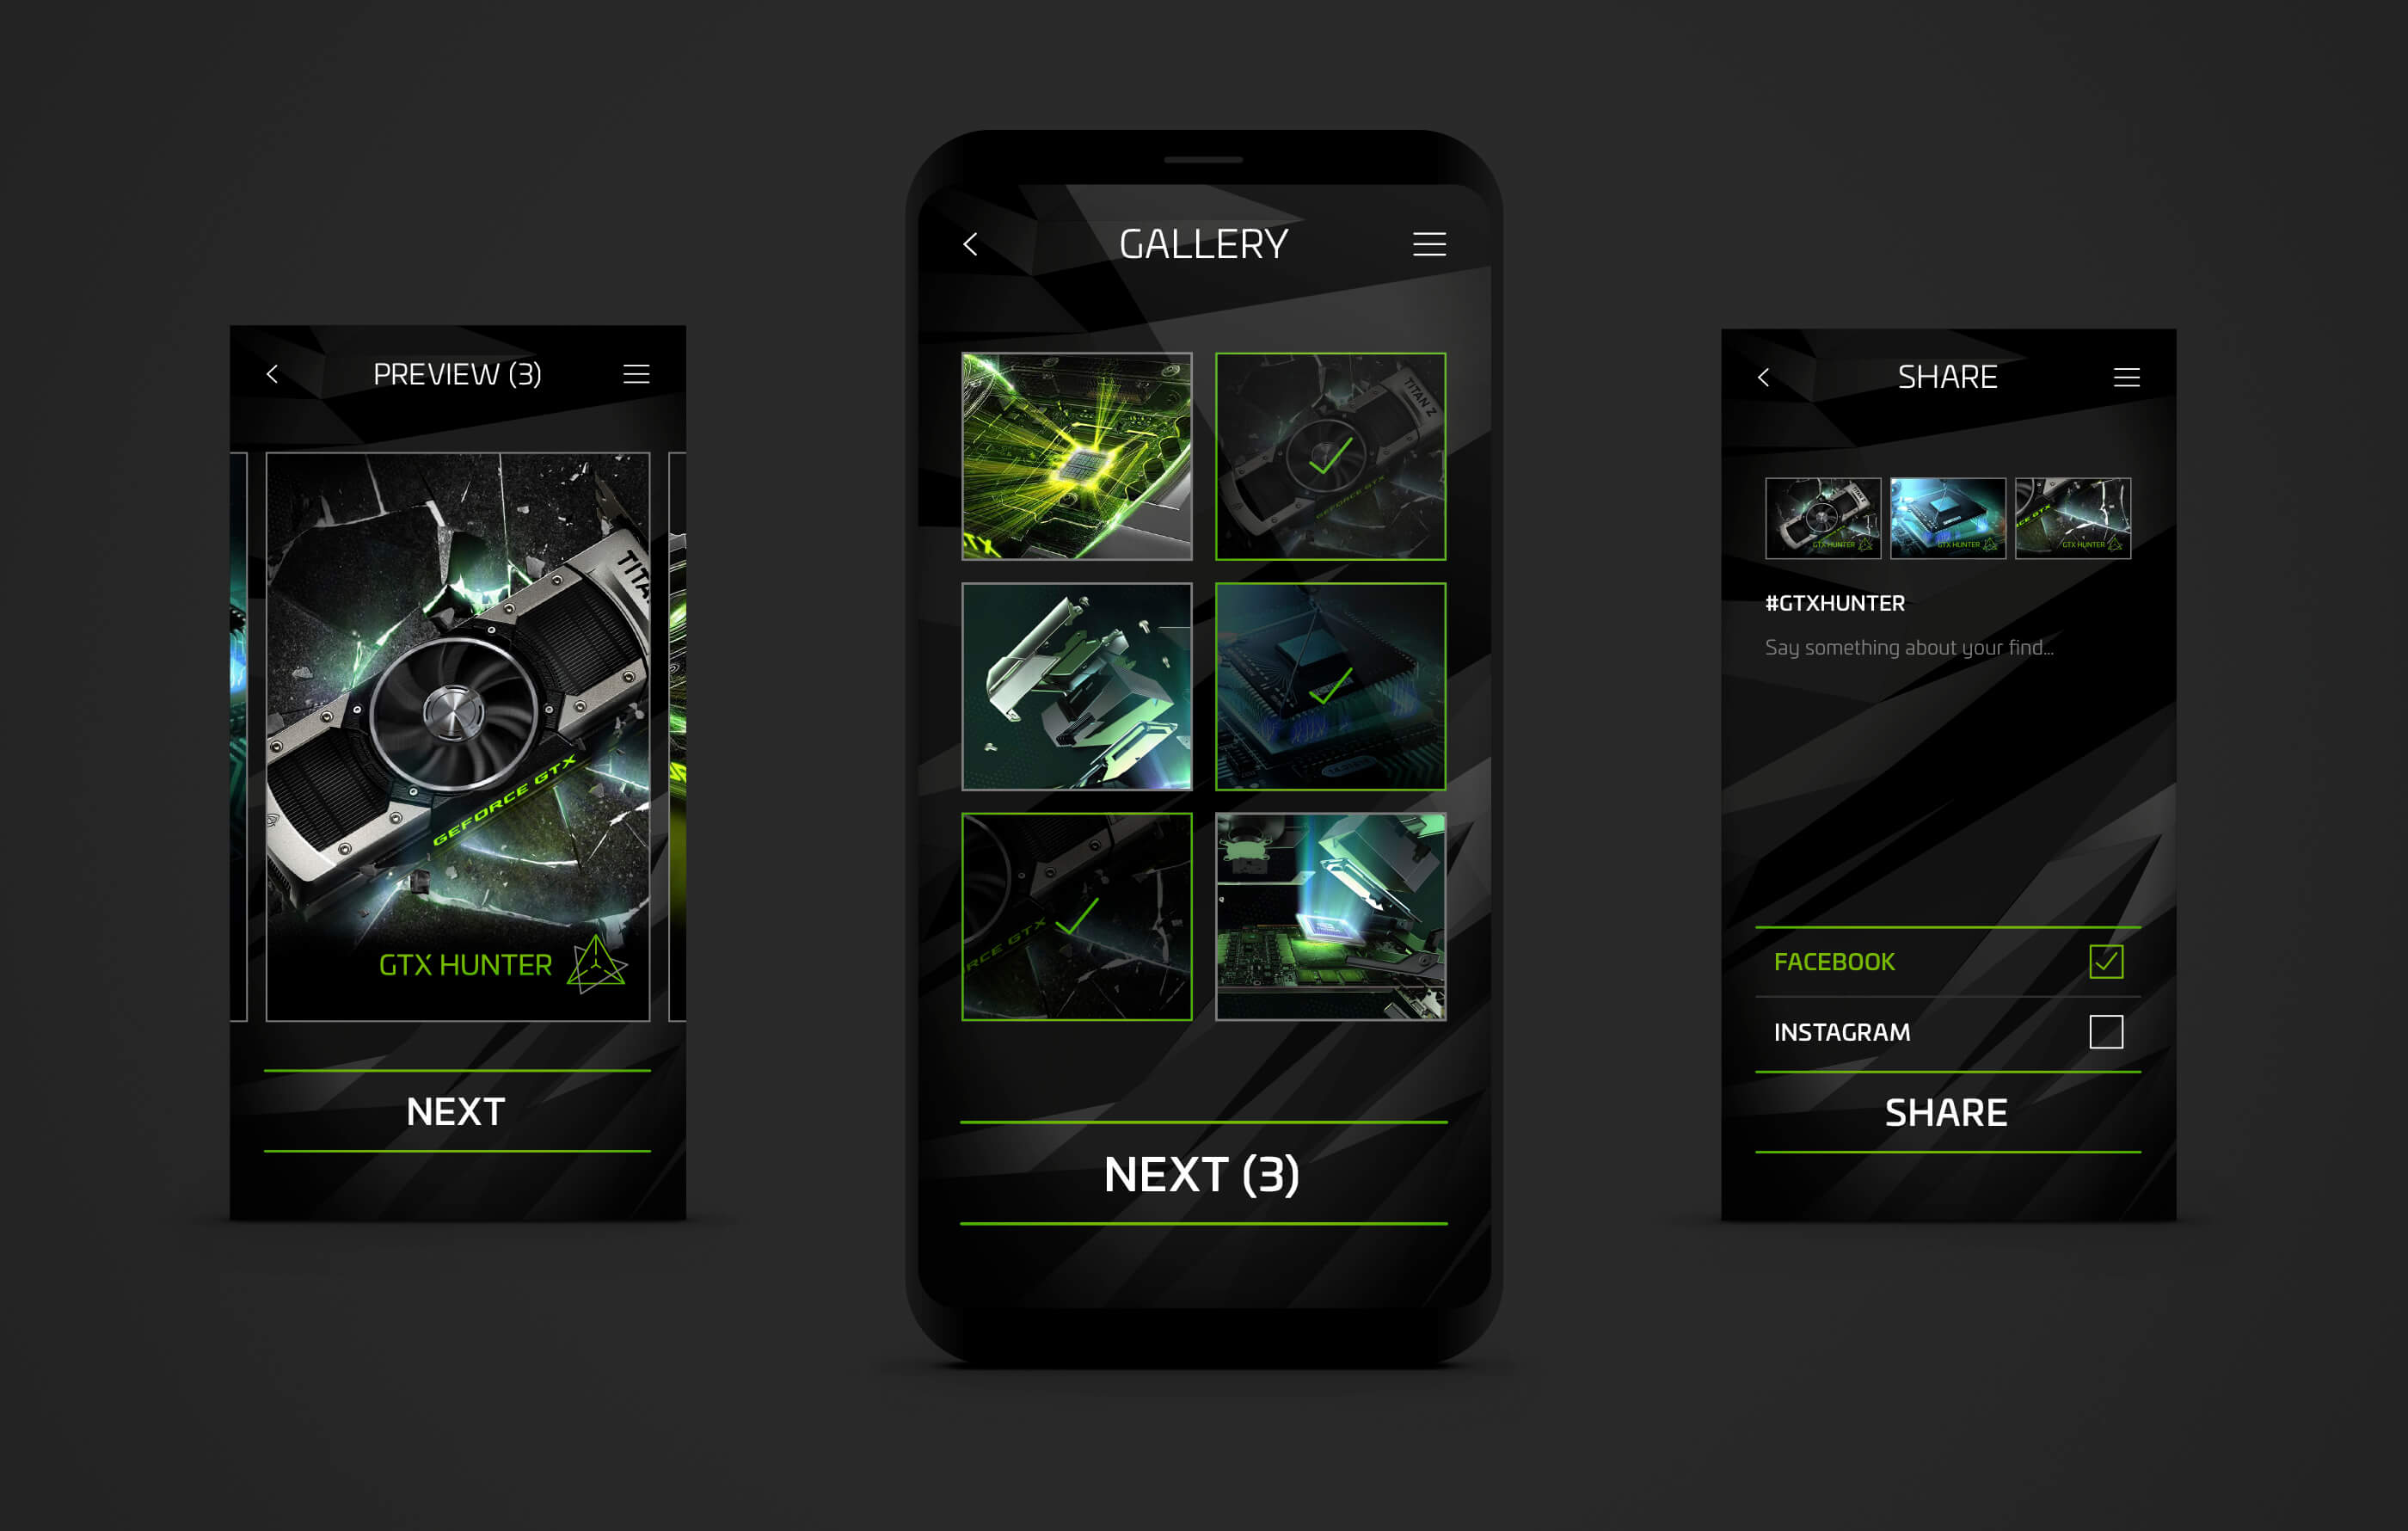 Final renders of three mobile screens within the app, showing how a user journey selects, comments on and shares an image on Facebook or Instagram